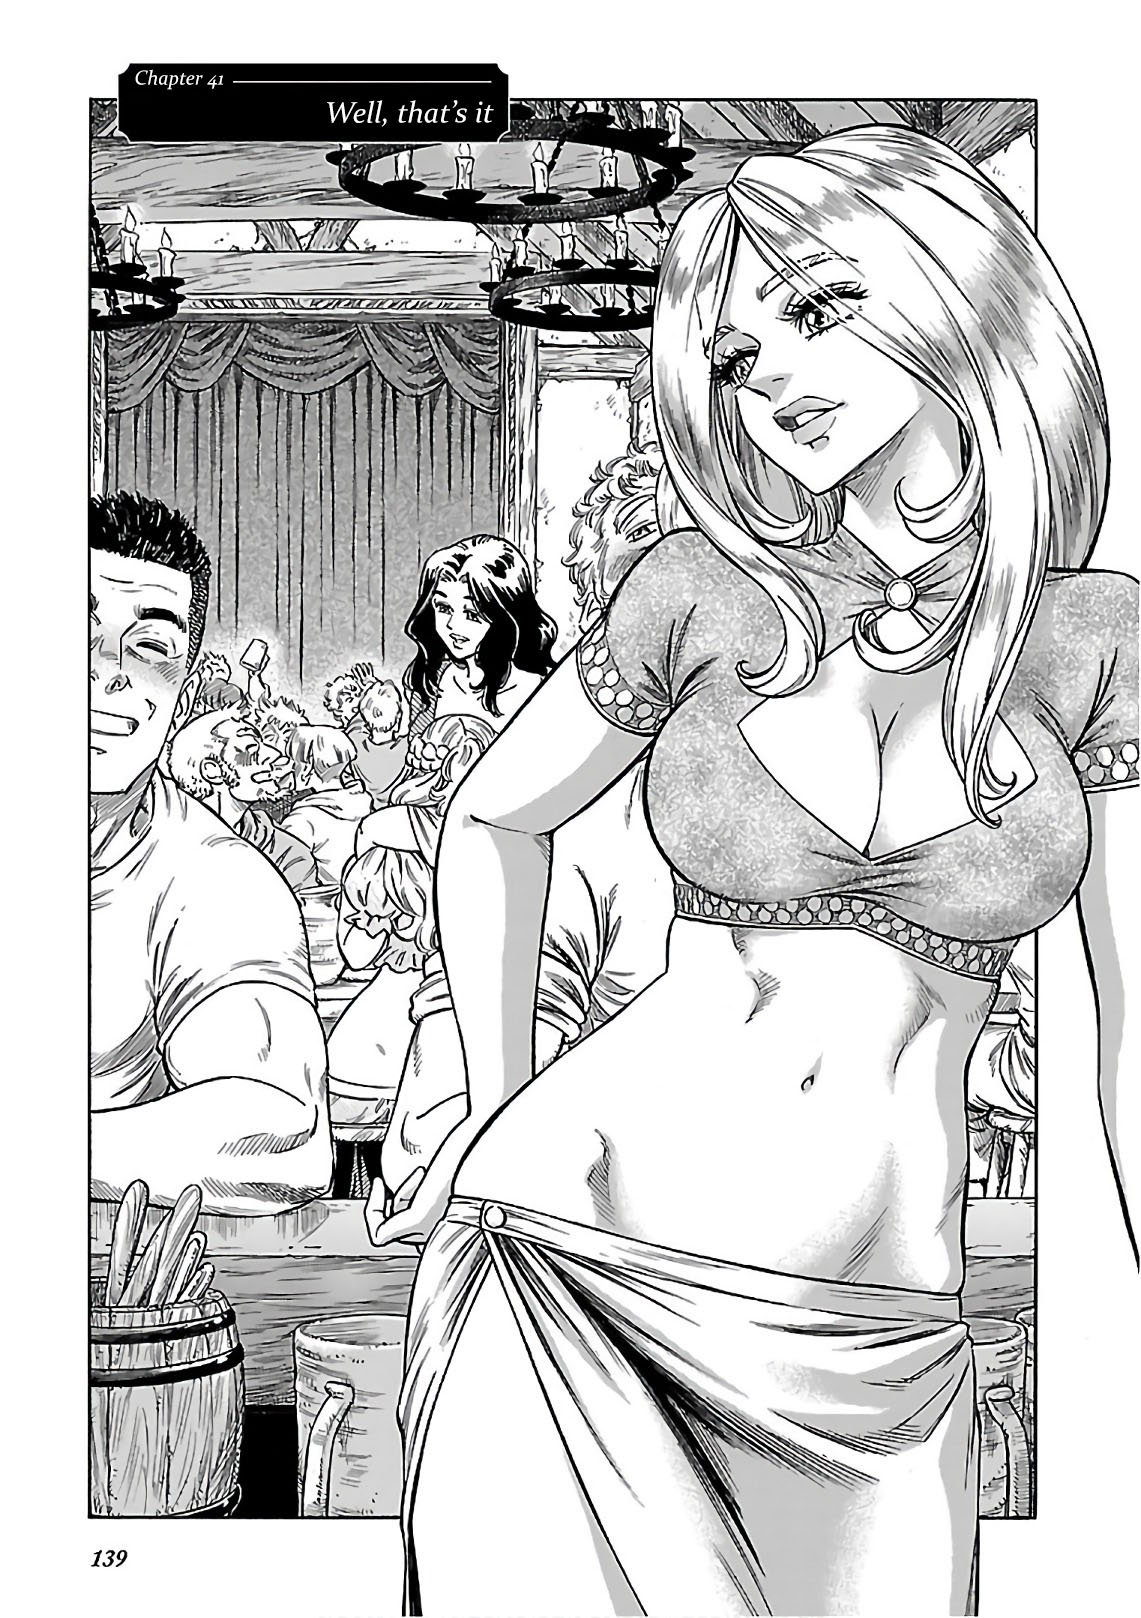 Stravaganza - Isai No Hime Chapter 41: Well, That's It - Picture 1